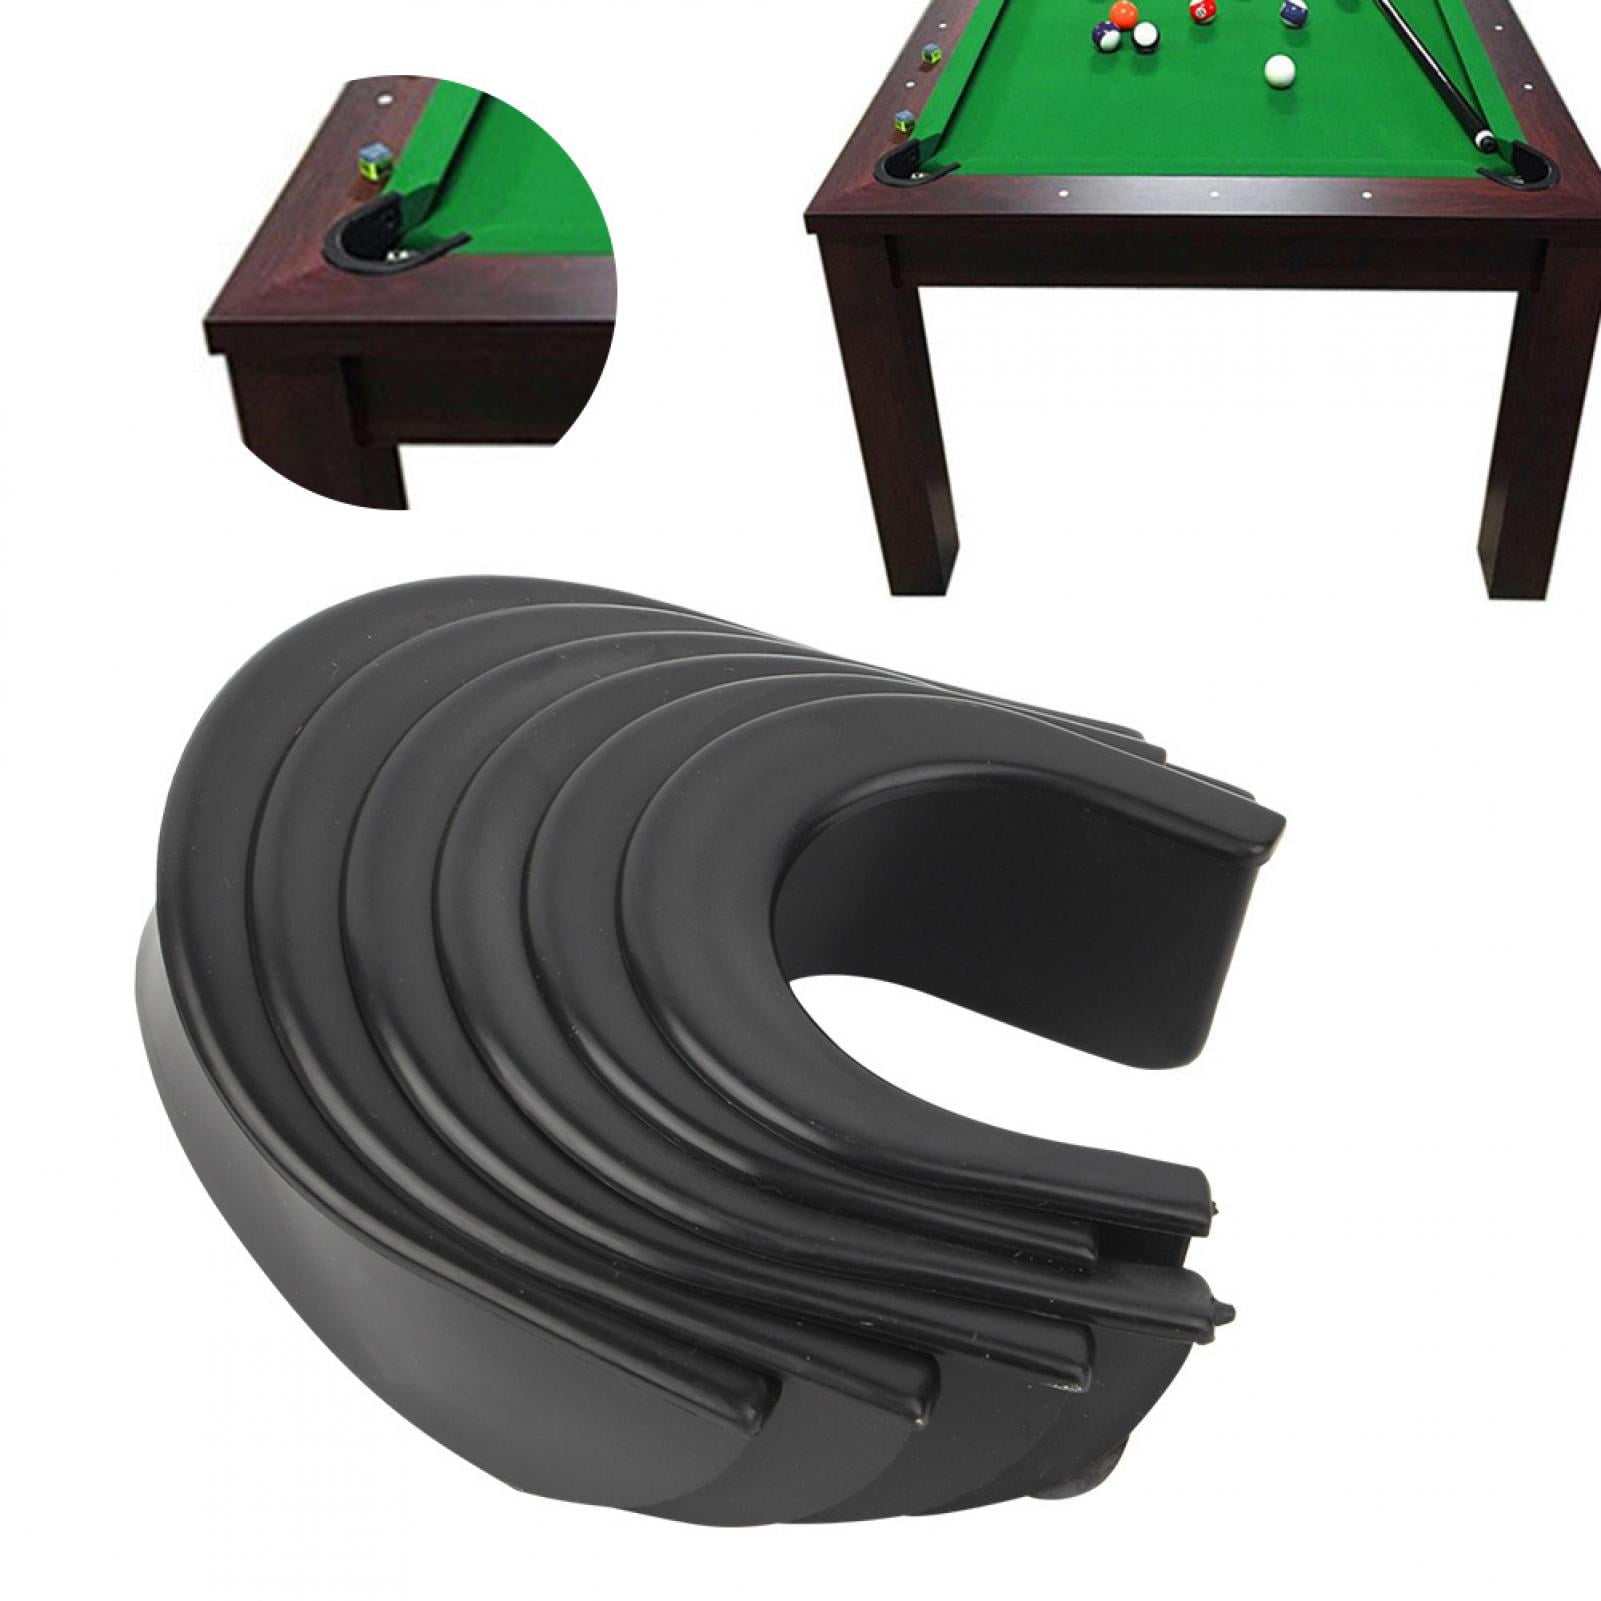 Set of 6 Pieces Snooker or Pool Billiards Table Pocket Leather Small Size 